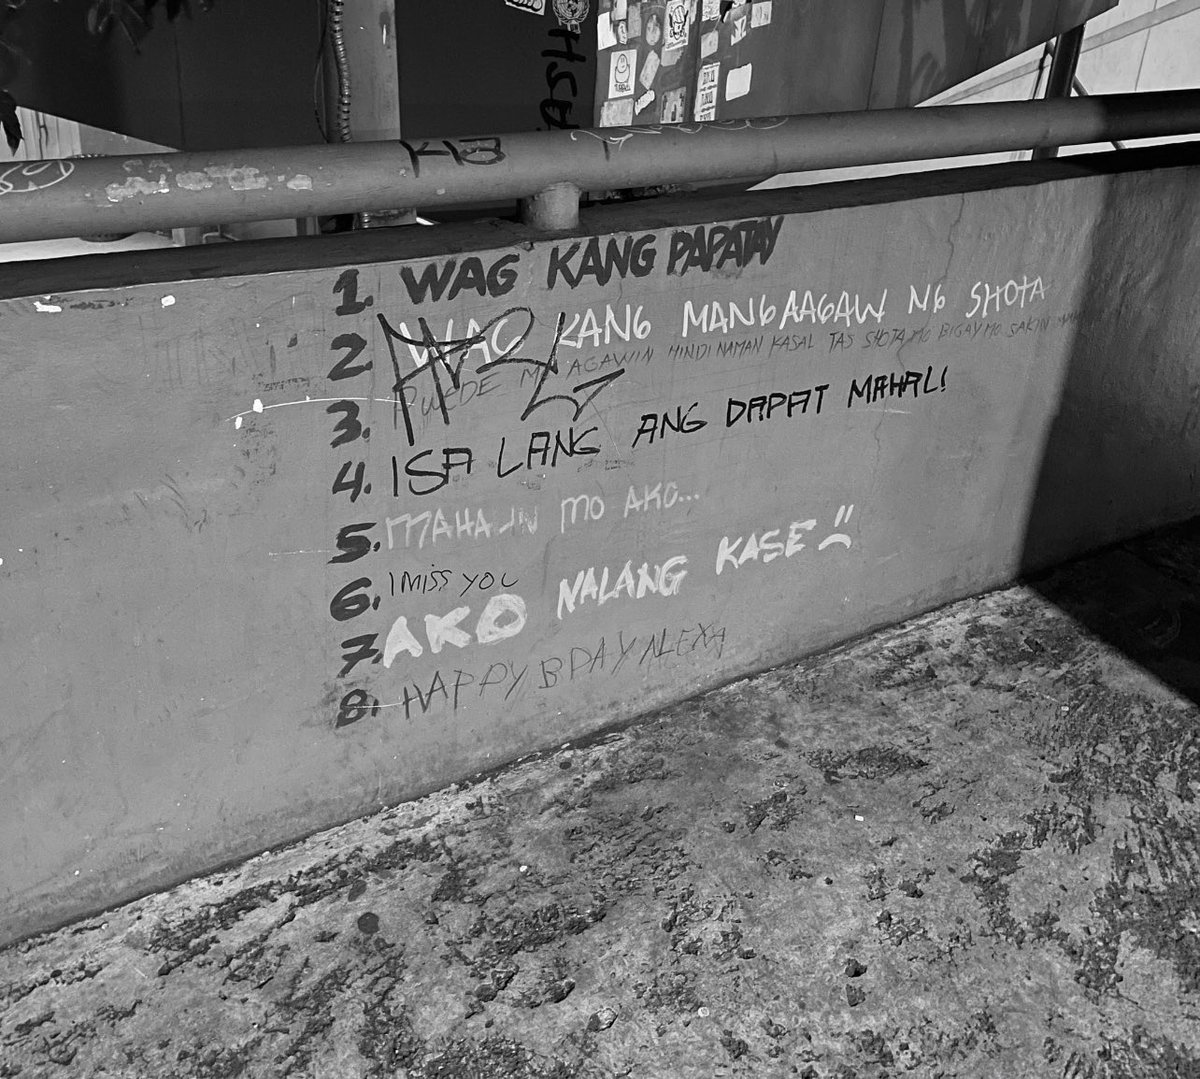 Etching of the first 10 Commandments Stone Tablets after the introduction of Christianity (c 1500s - 1600s)

#rp612fic